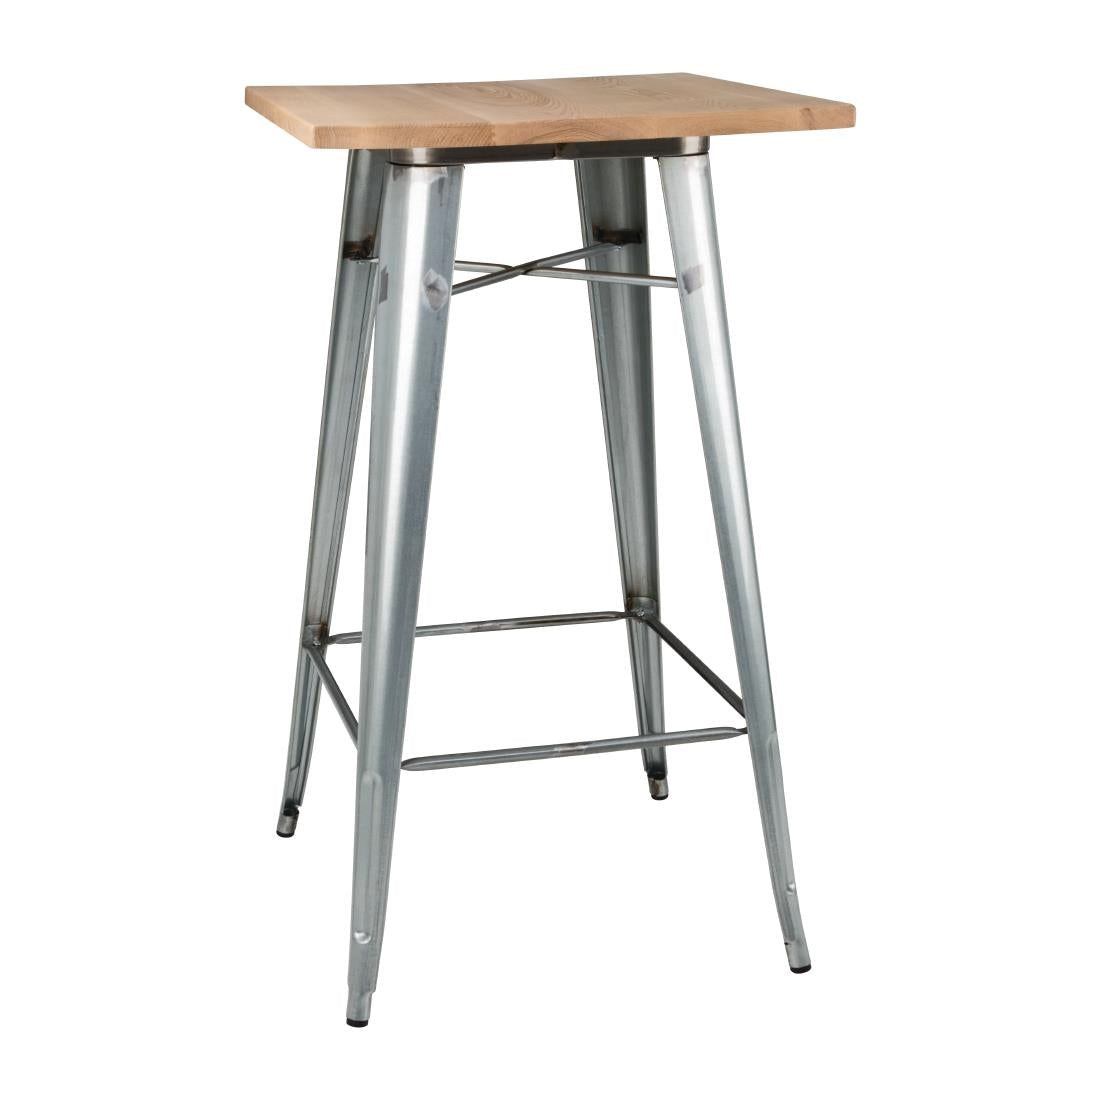 FB599 Bolero Bistro Bar Table with Wooden Top Galvanised Steel (Single) JD Catering Equipment Solutions Ltd